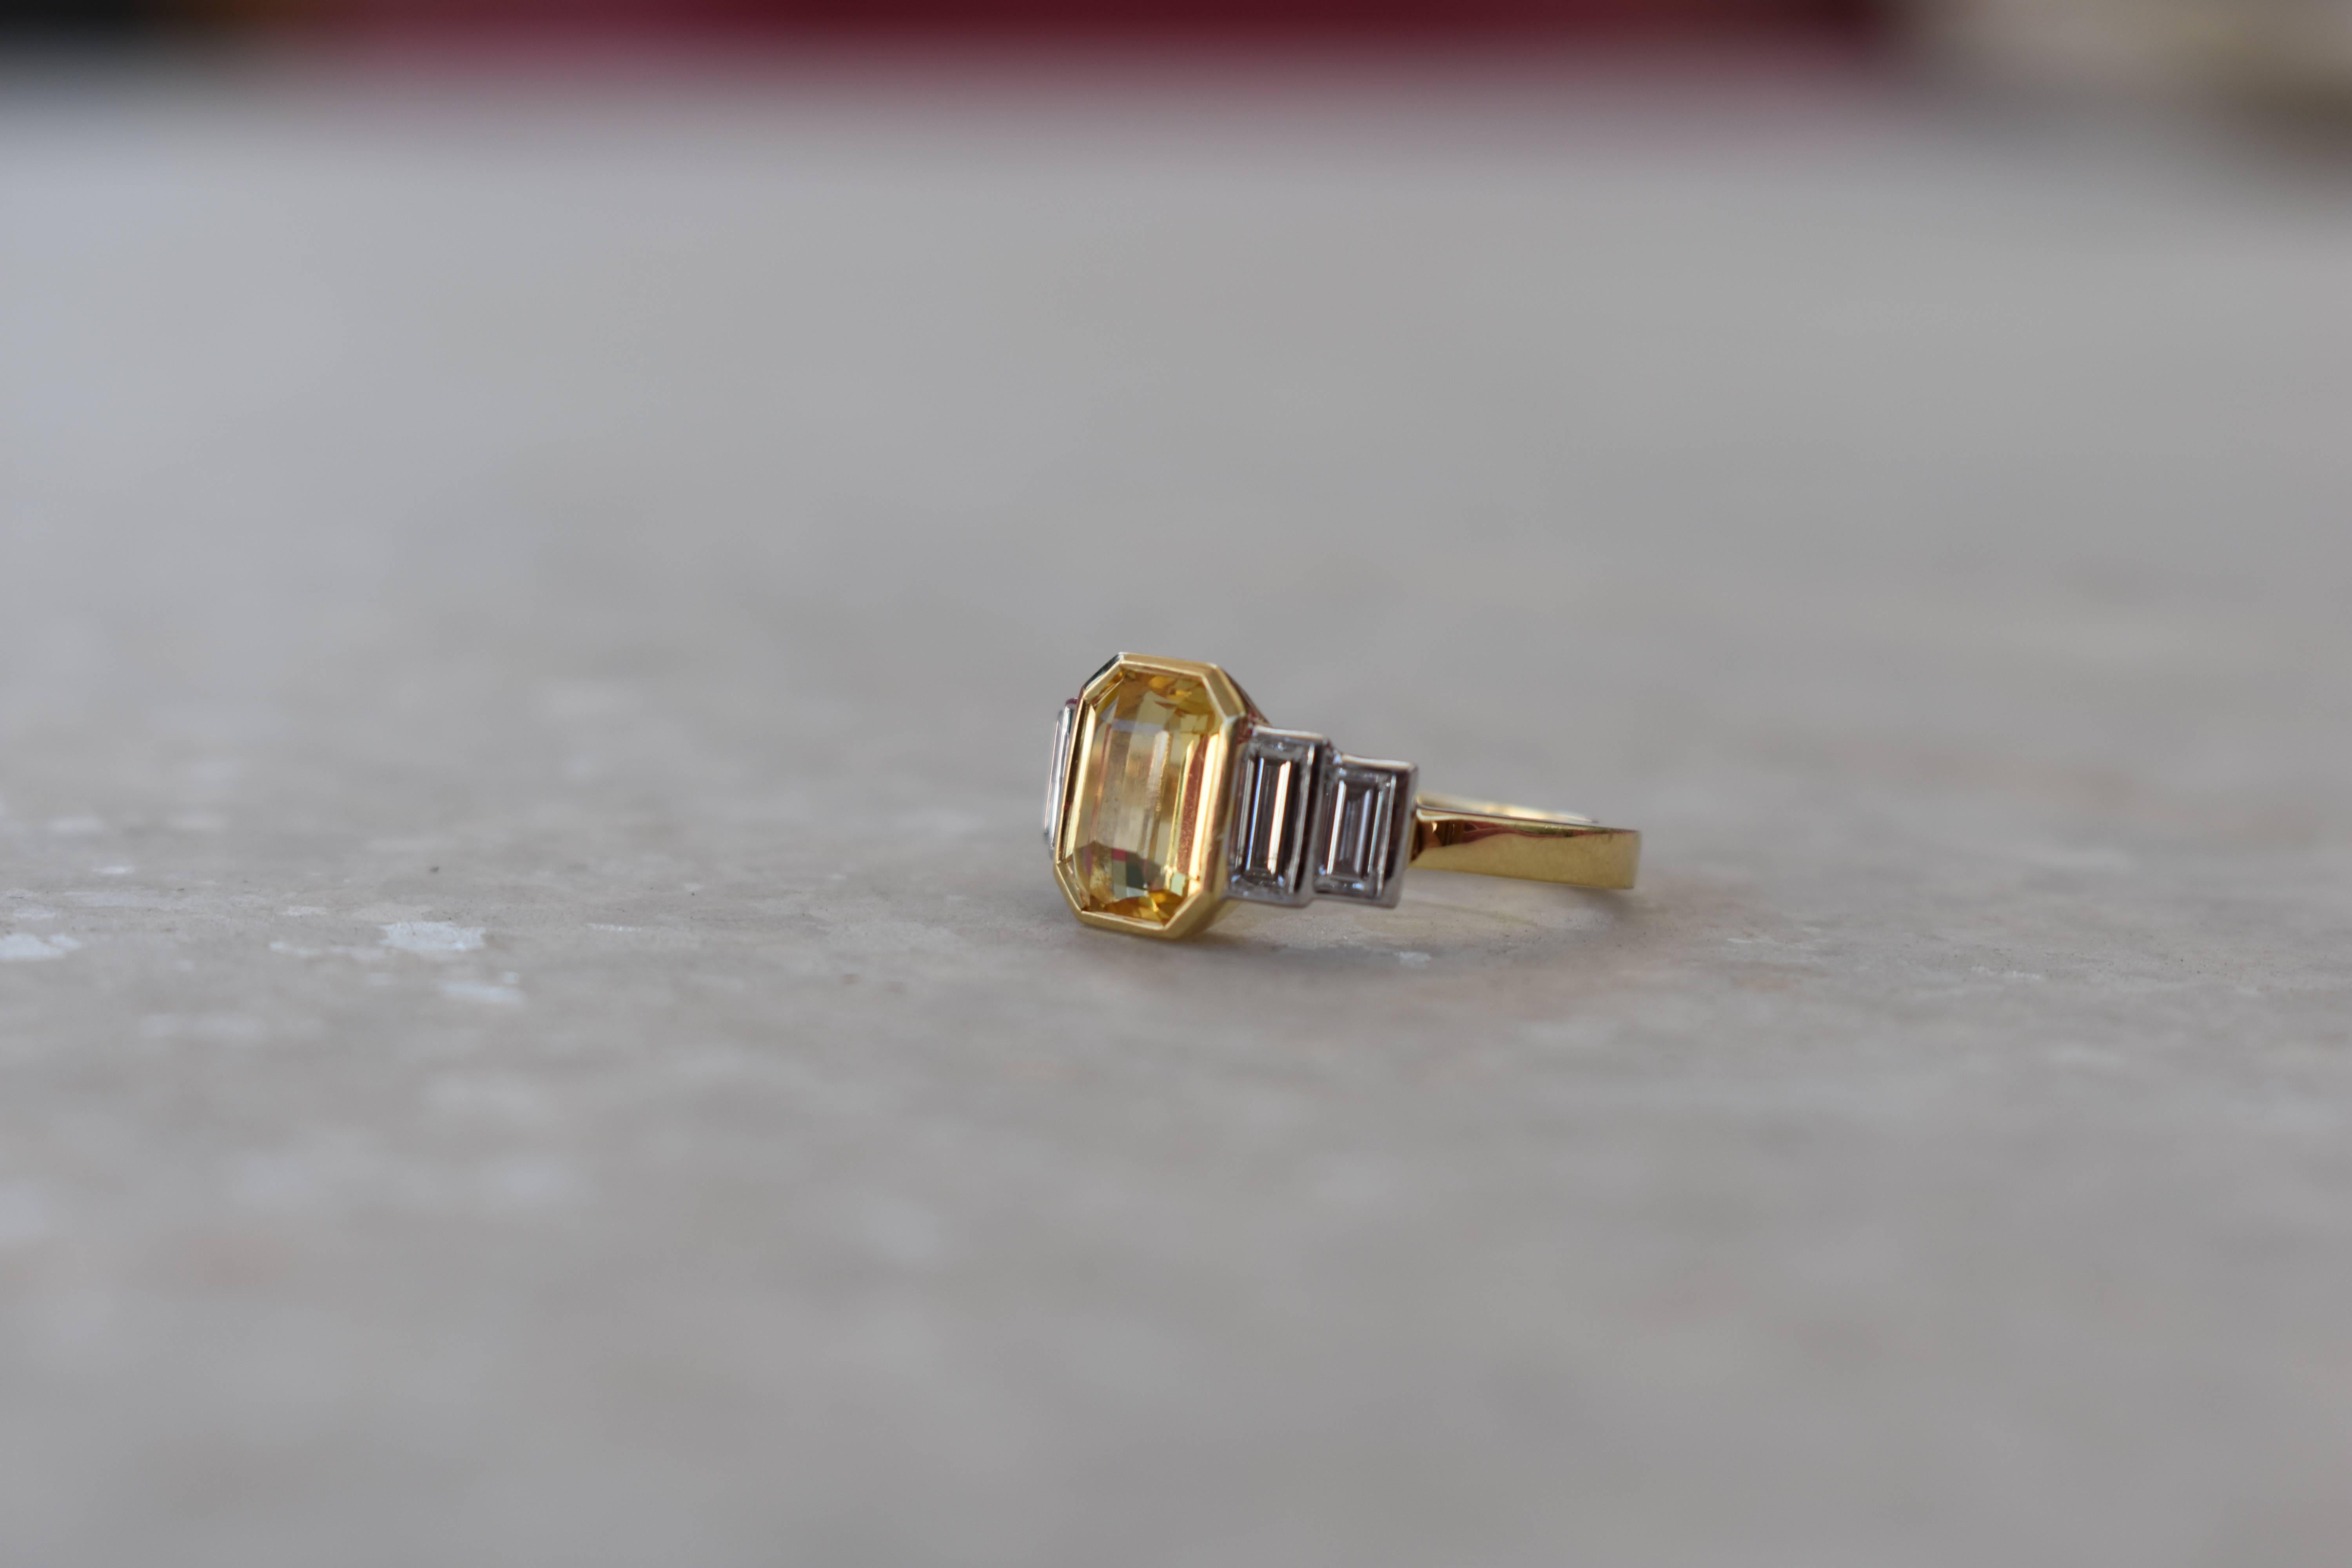 Made to order. A sophisticated Sri Lankan yellow, emerald cut sapphire and Baguette diamond ring. Emerald cut Sapphire and baguette Diamonds.  18 karat yellow and white gold surround the yellow, no heat, sapphire and tapered baguette diamonds.